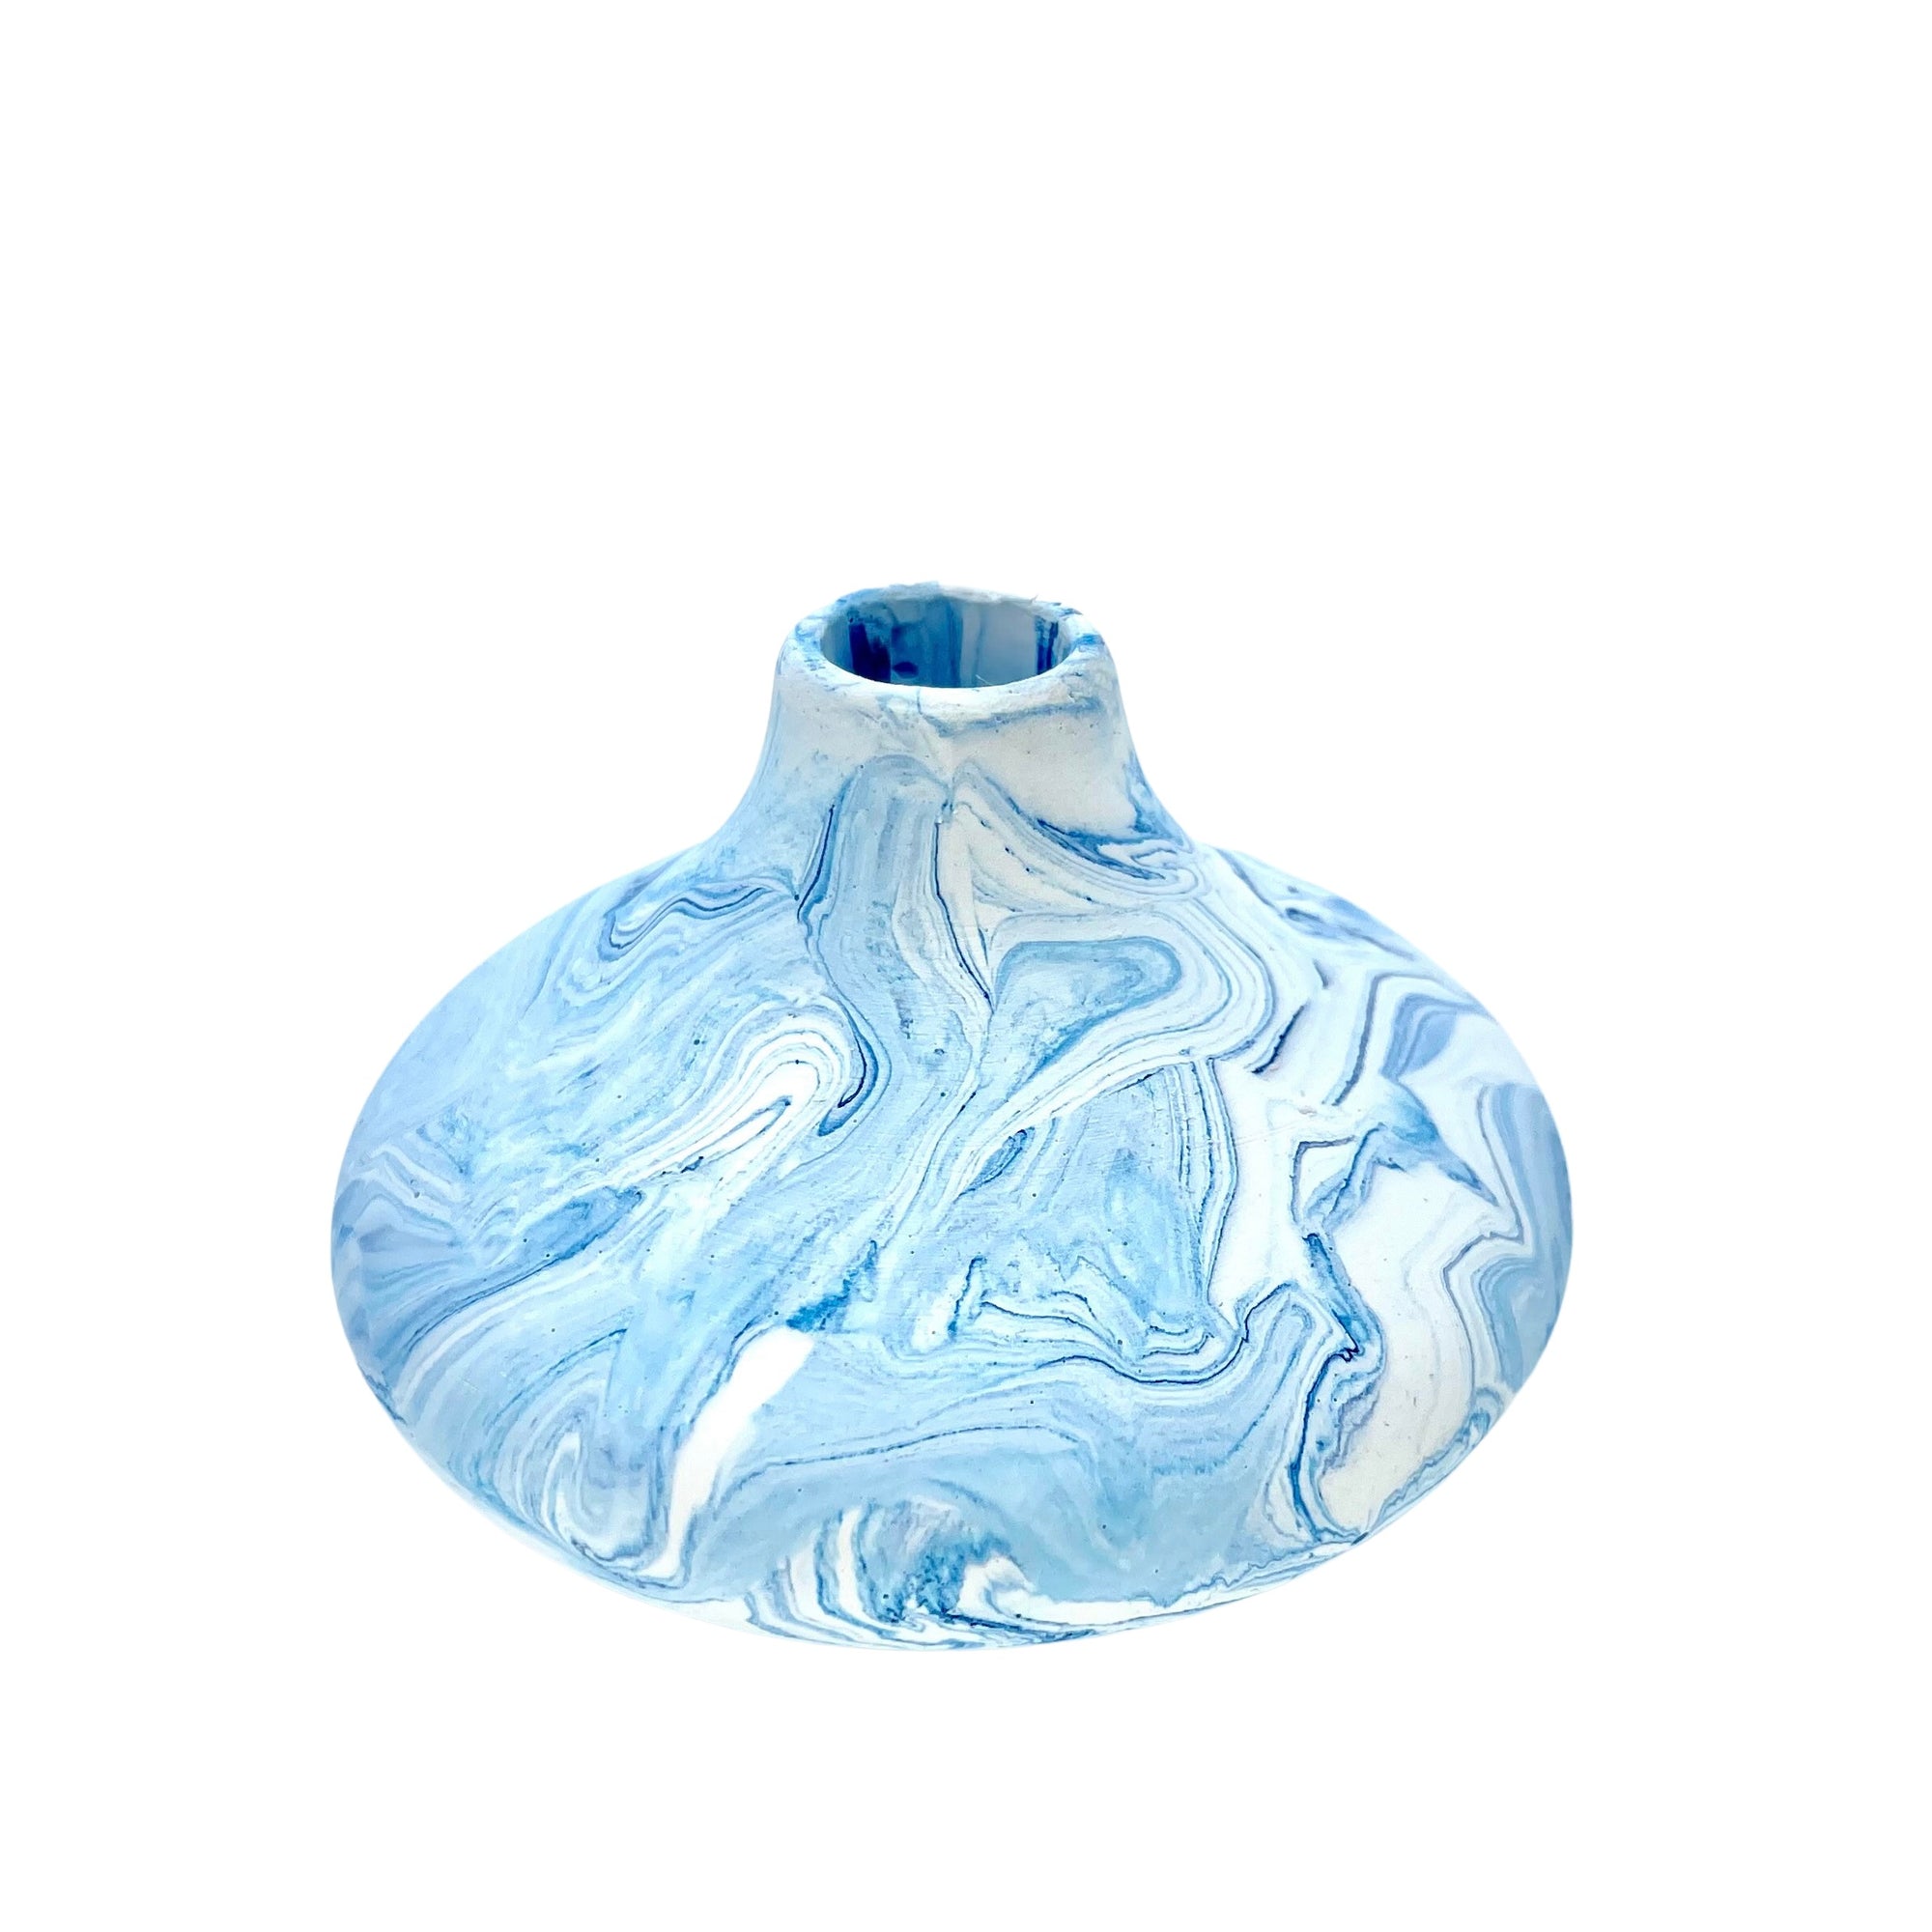 This small bulbous Jesmonite vase is marbled with baby blue  pigment.